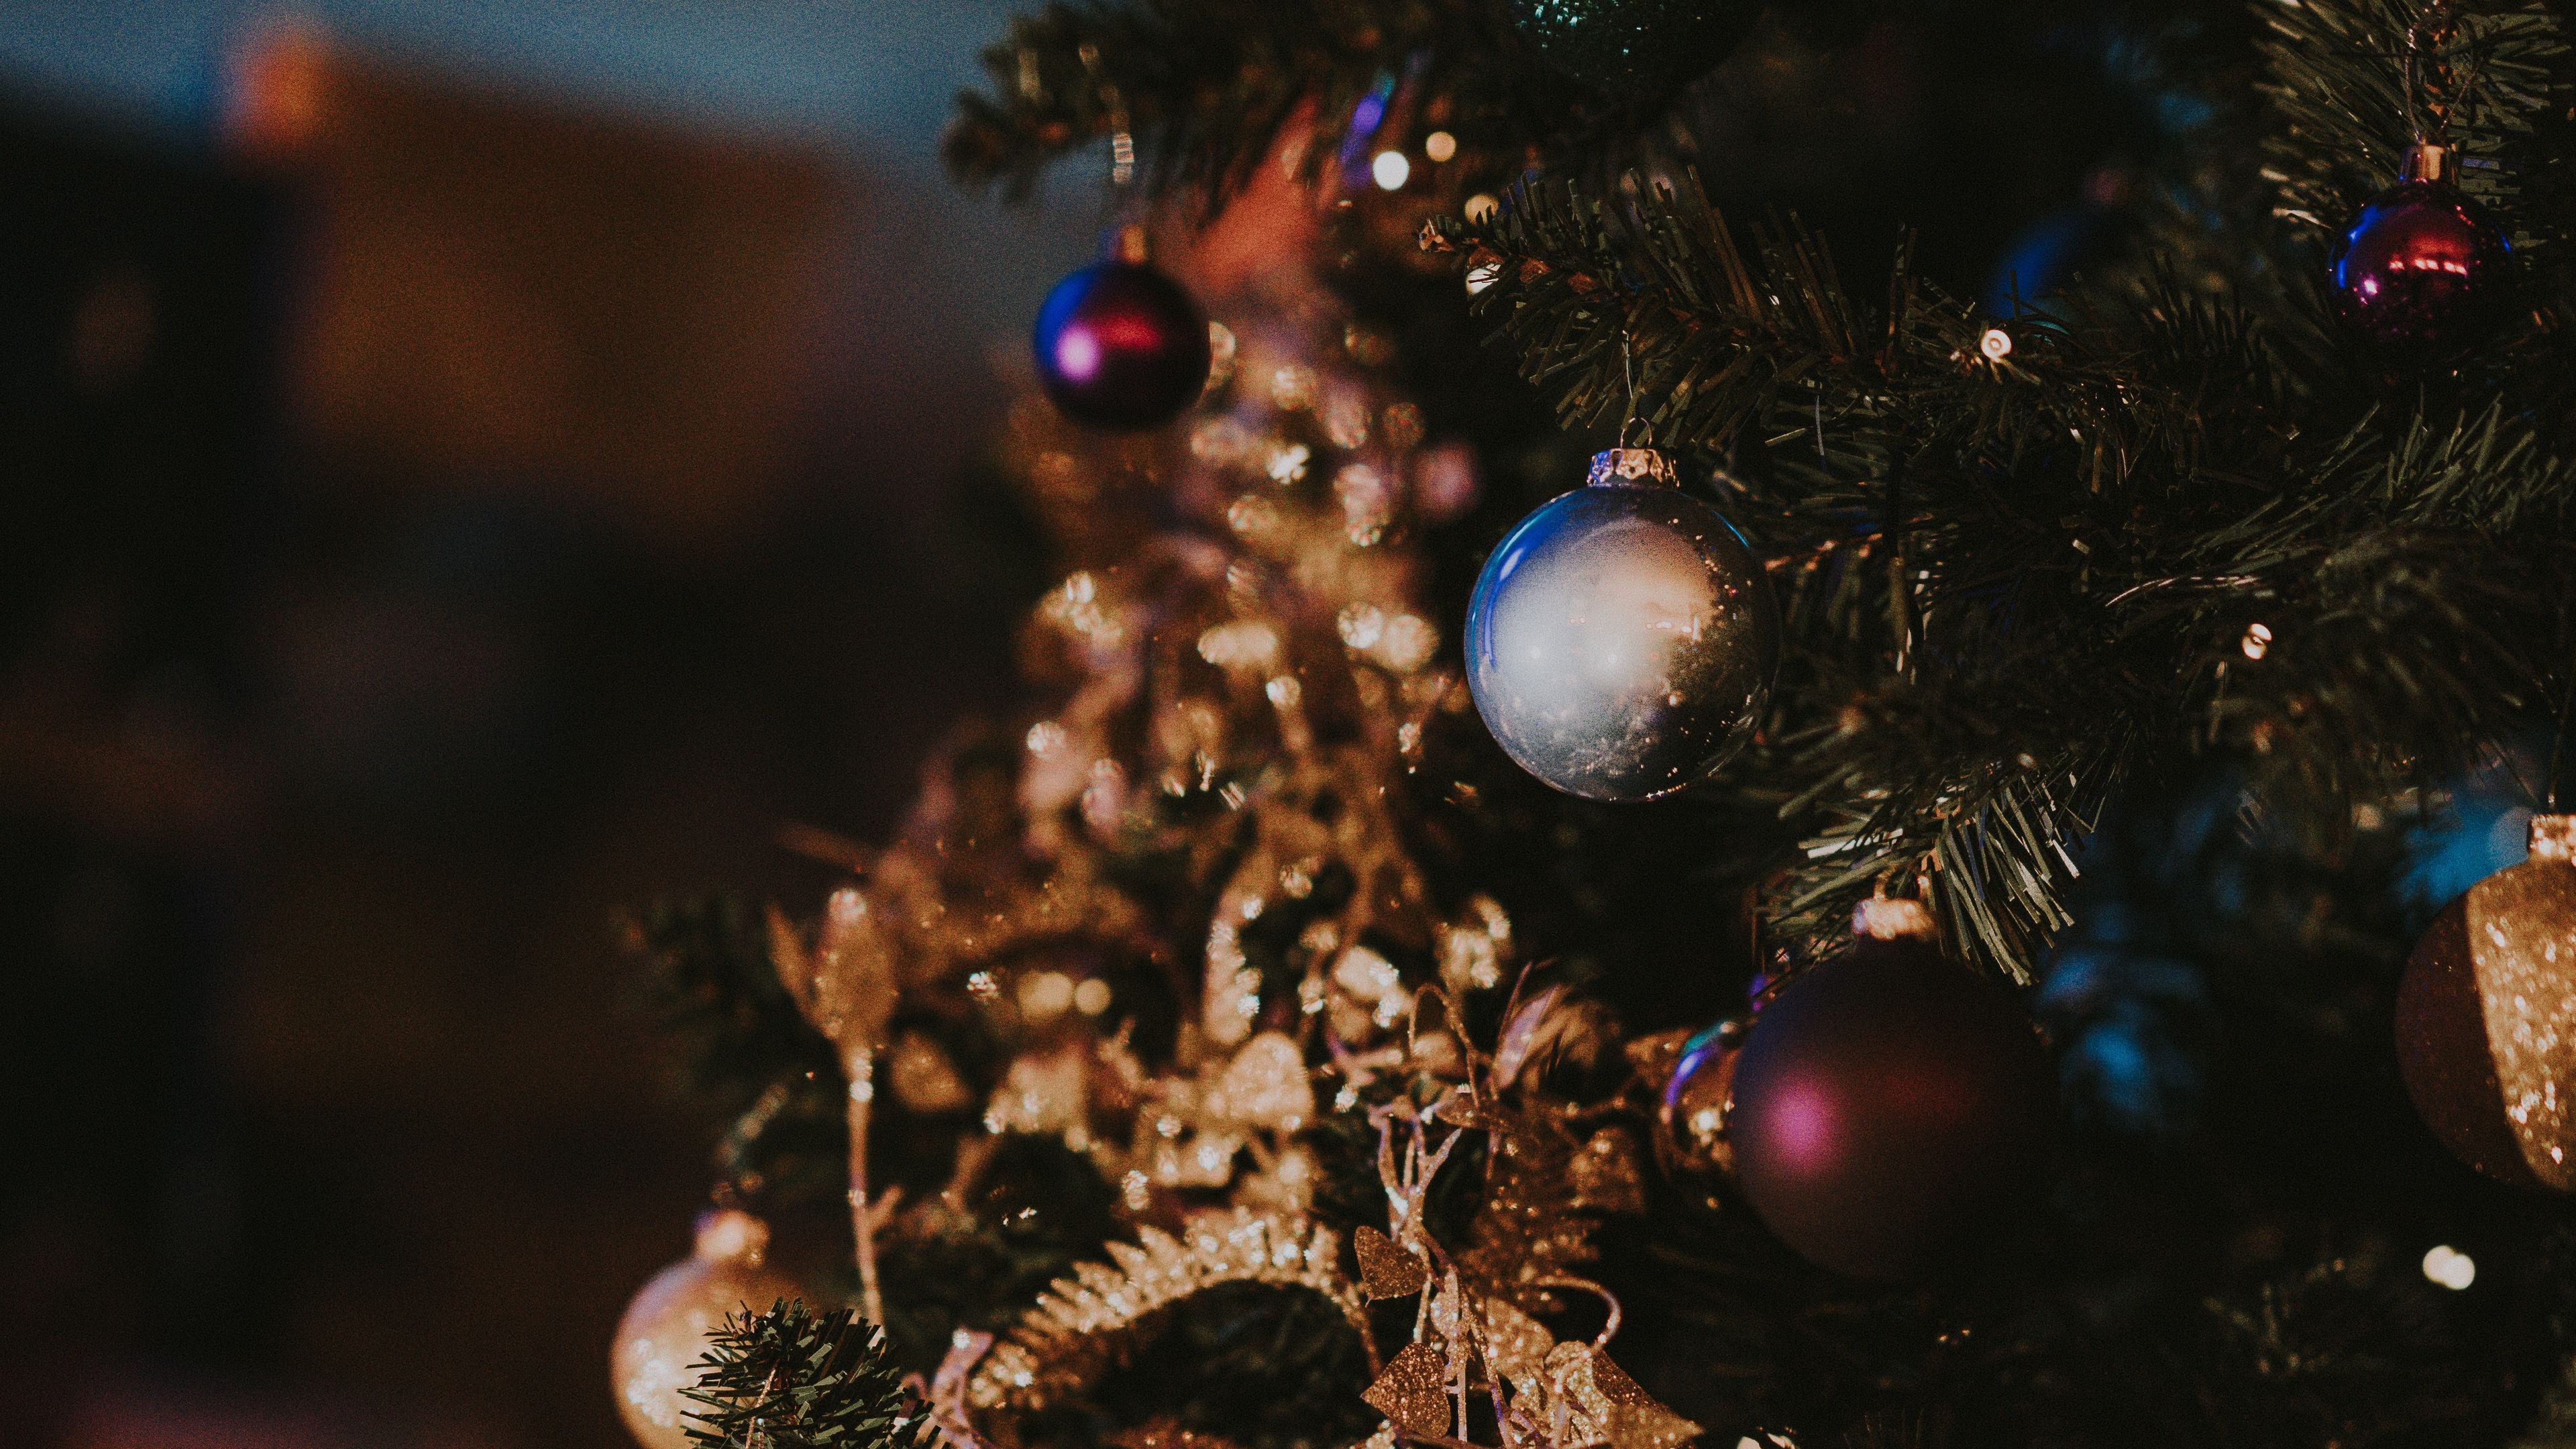 Christmas 4K wallpapers for your desktop or mobile screen free and easy to download